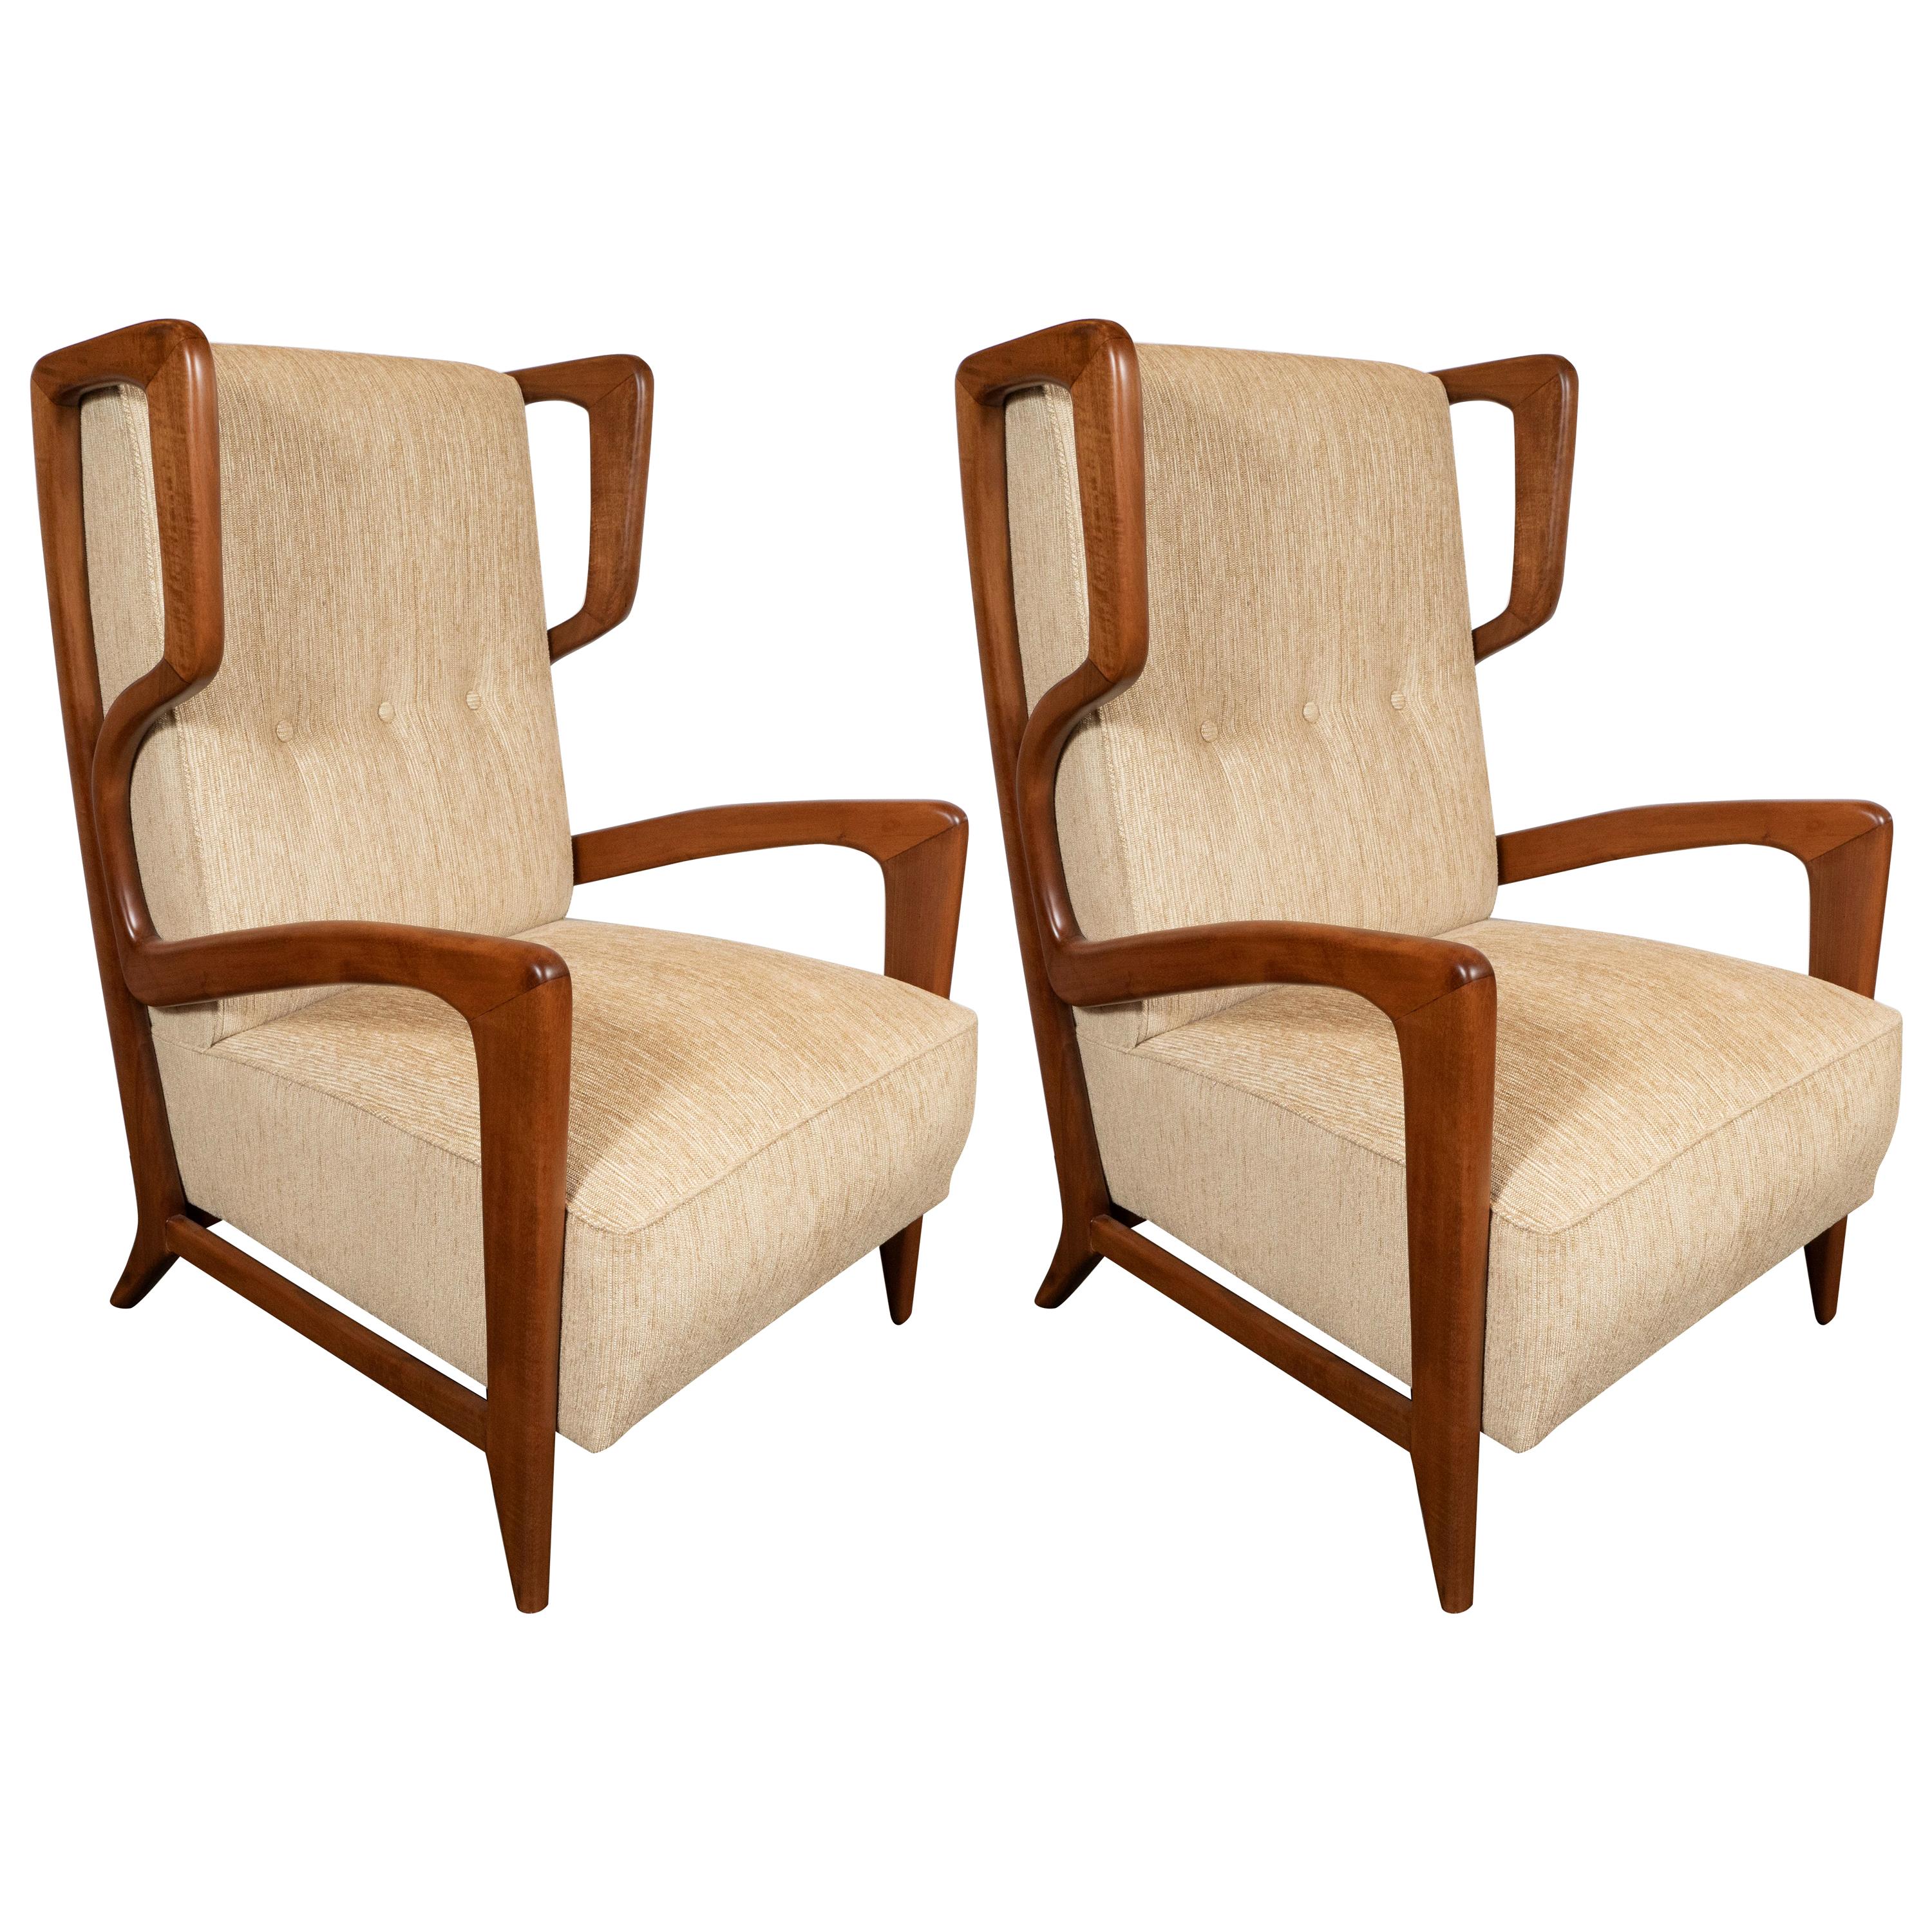 Pair of Sculptural Midcentury Button Back Handrubbed Walnut Lounge Chairs